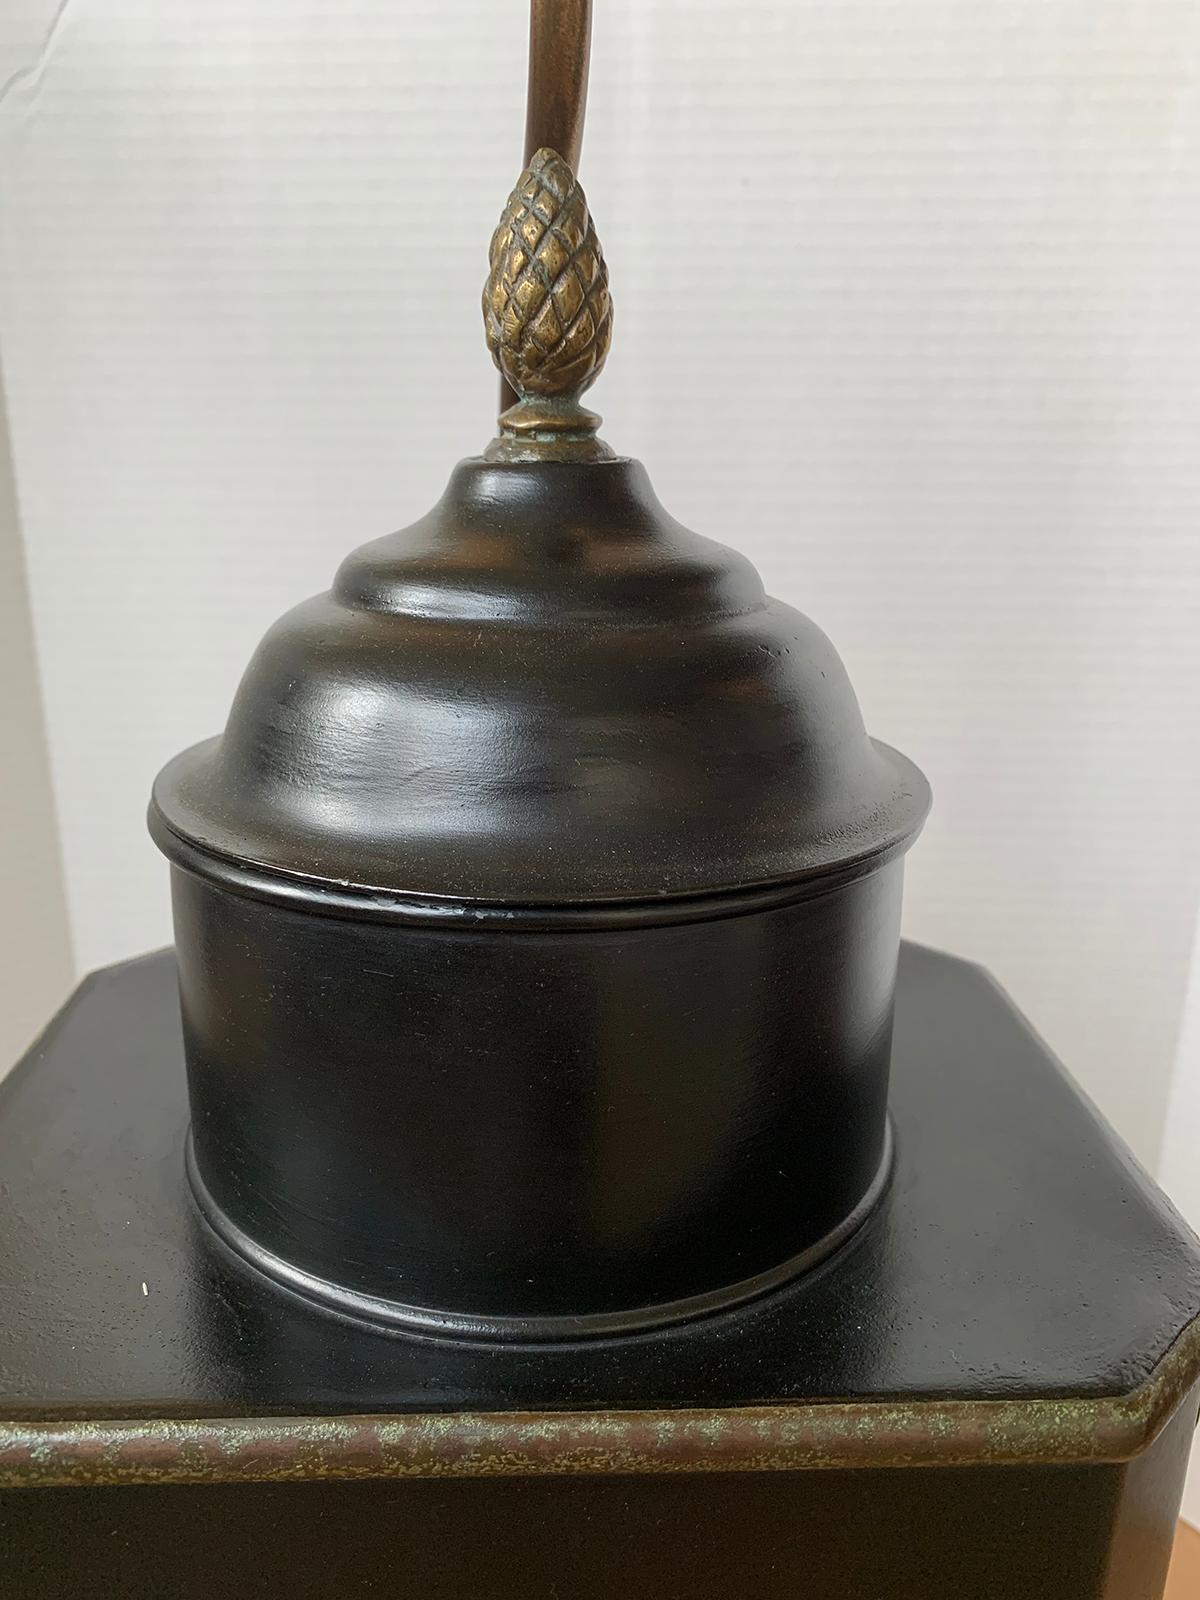 19th-20th Century Regency Style Hot Water Urn as Lamp 15